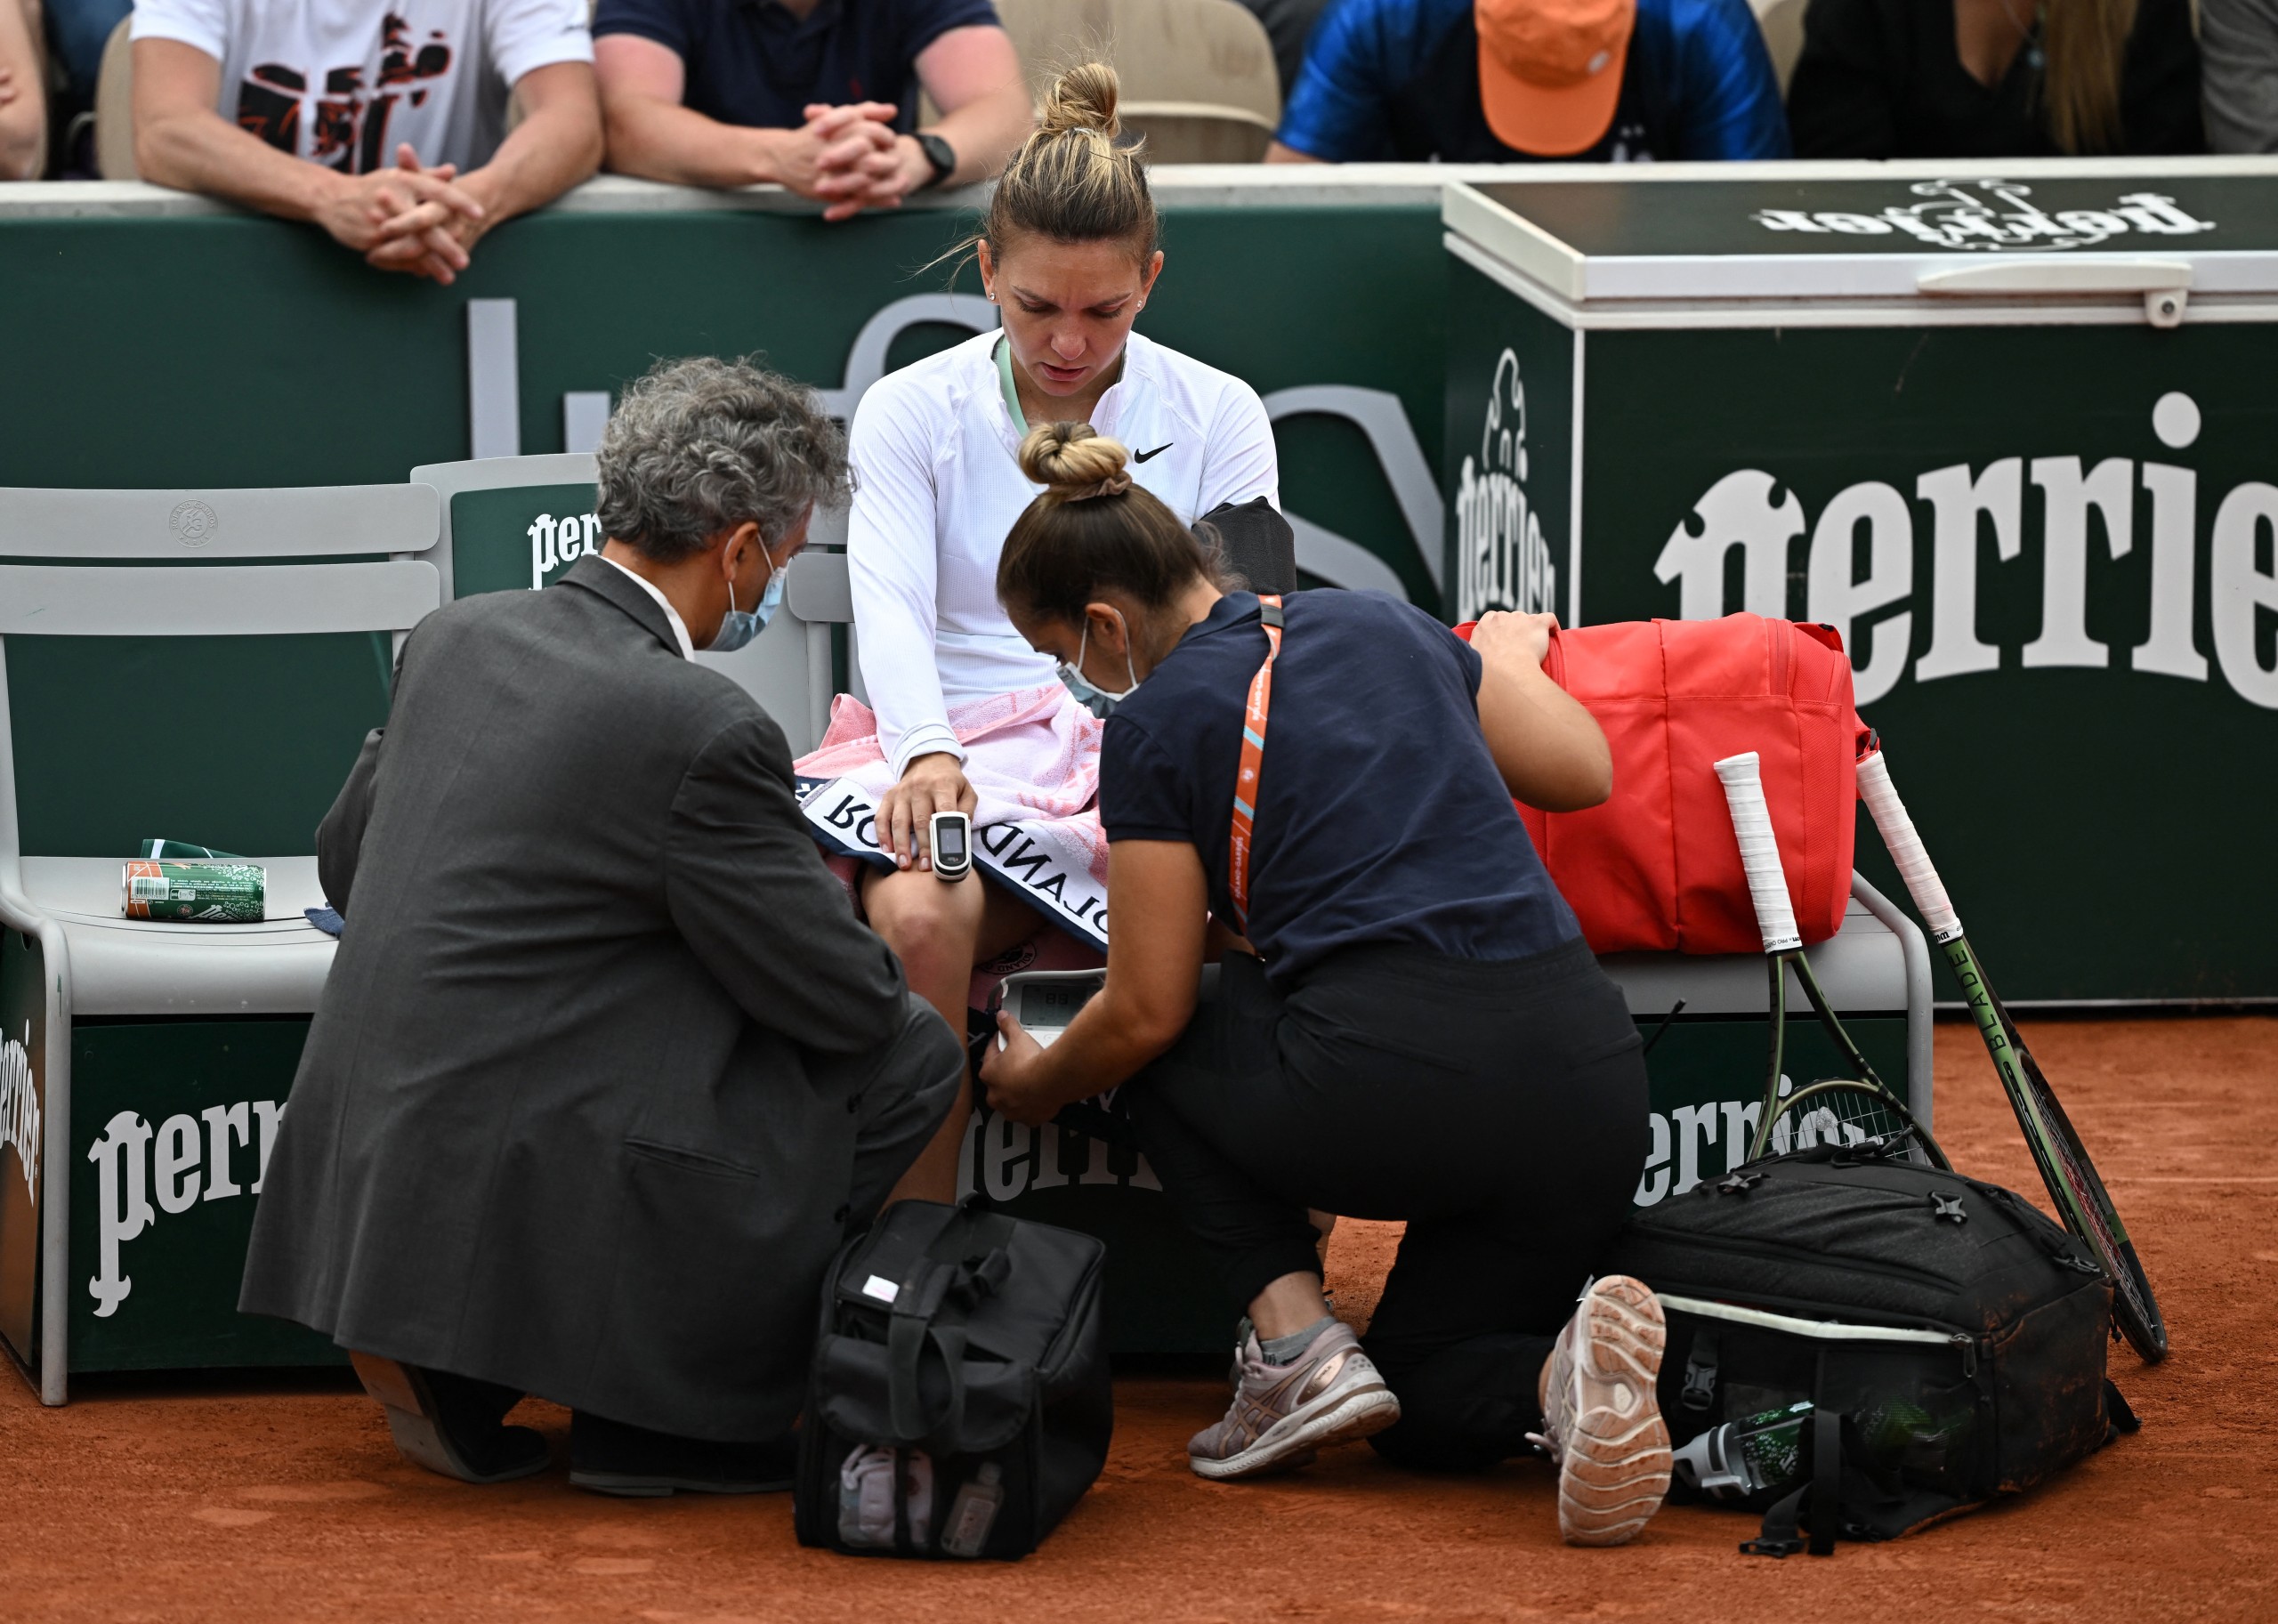 Tennis - French Open - Roland Garros, Paris, France - May 26, 2022 Romania's Simona Halep receives medical attention during her second round match against China's Qinwen Zheng REUTERS/Dylan Martinez